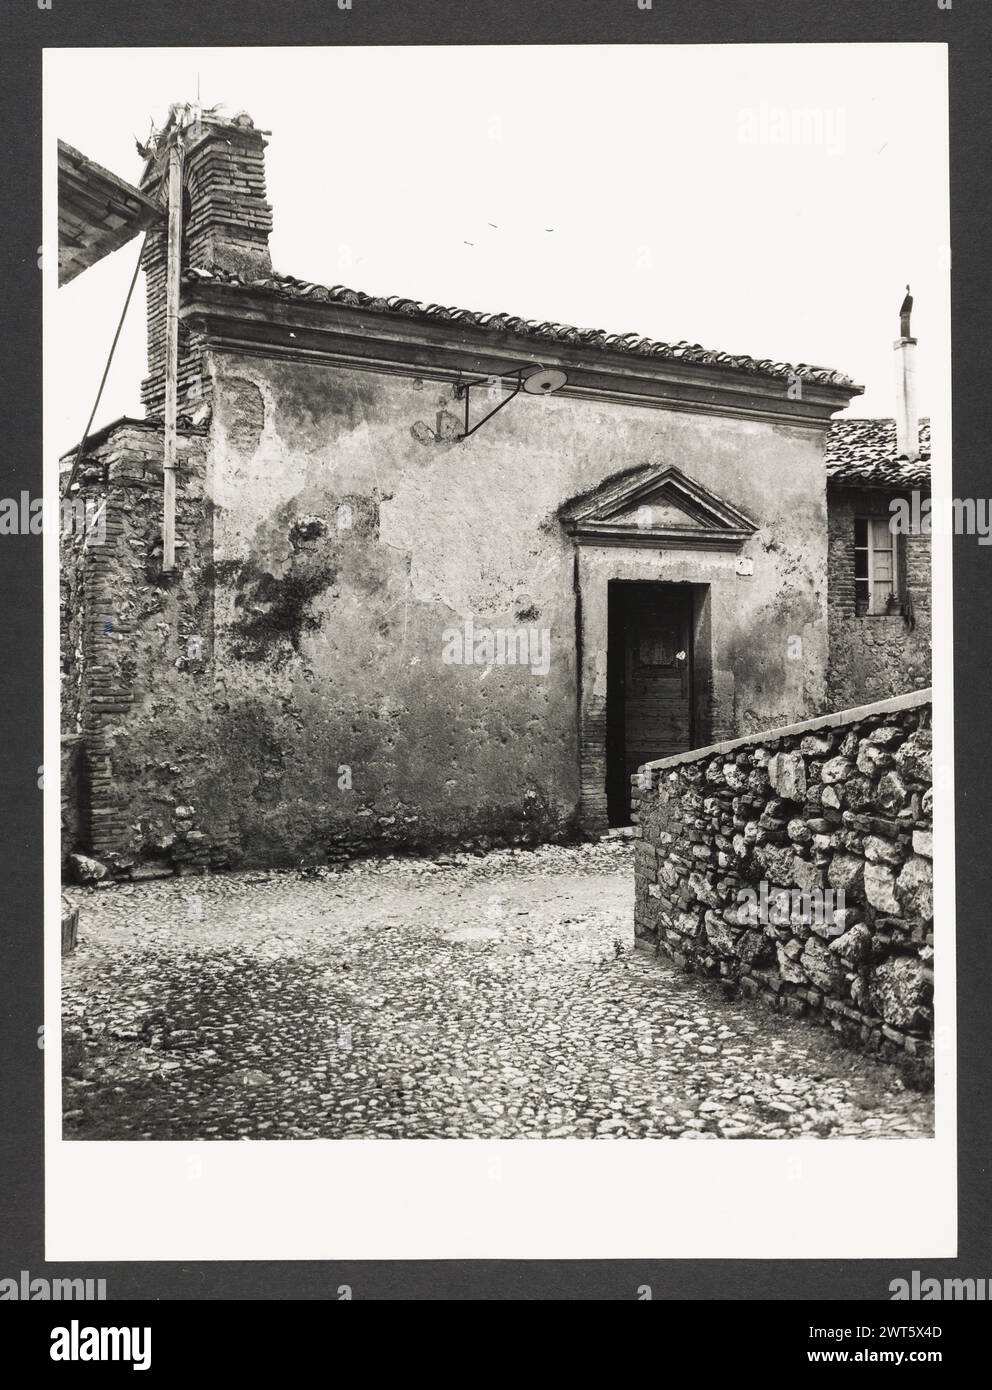 Lazio Rieti Roccantica S. Caterina. Hutzel, Max 1960-1990 Exterior views of the church facade. All interior views of the late gothic frescoes by Pietro Coleberti da Priverno (1430). German-born photographer and scholar Max Hutzel (1911-1988) photographed in Italy from the early 1960s until his death. The result of this project, referred to by Hutzel as Foto Arte Minore, is thorough documentation of art historical development in Italy up to the 18th century, including objects of the Etruscans and the Romans, as well as early Medieval, Romanesque, Gothic, Renaissance and Baroque monuments. Image Stock Photo